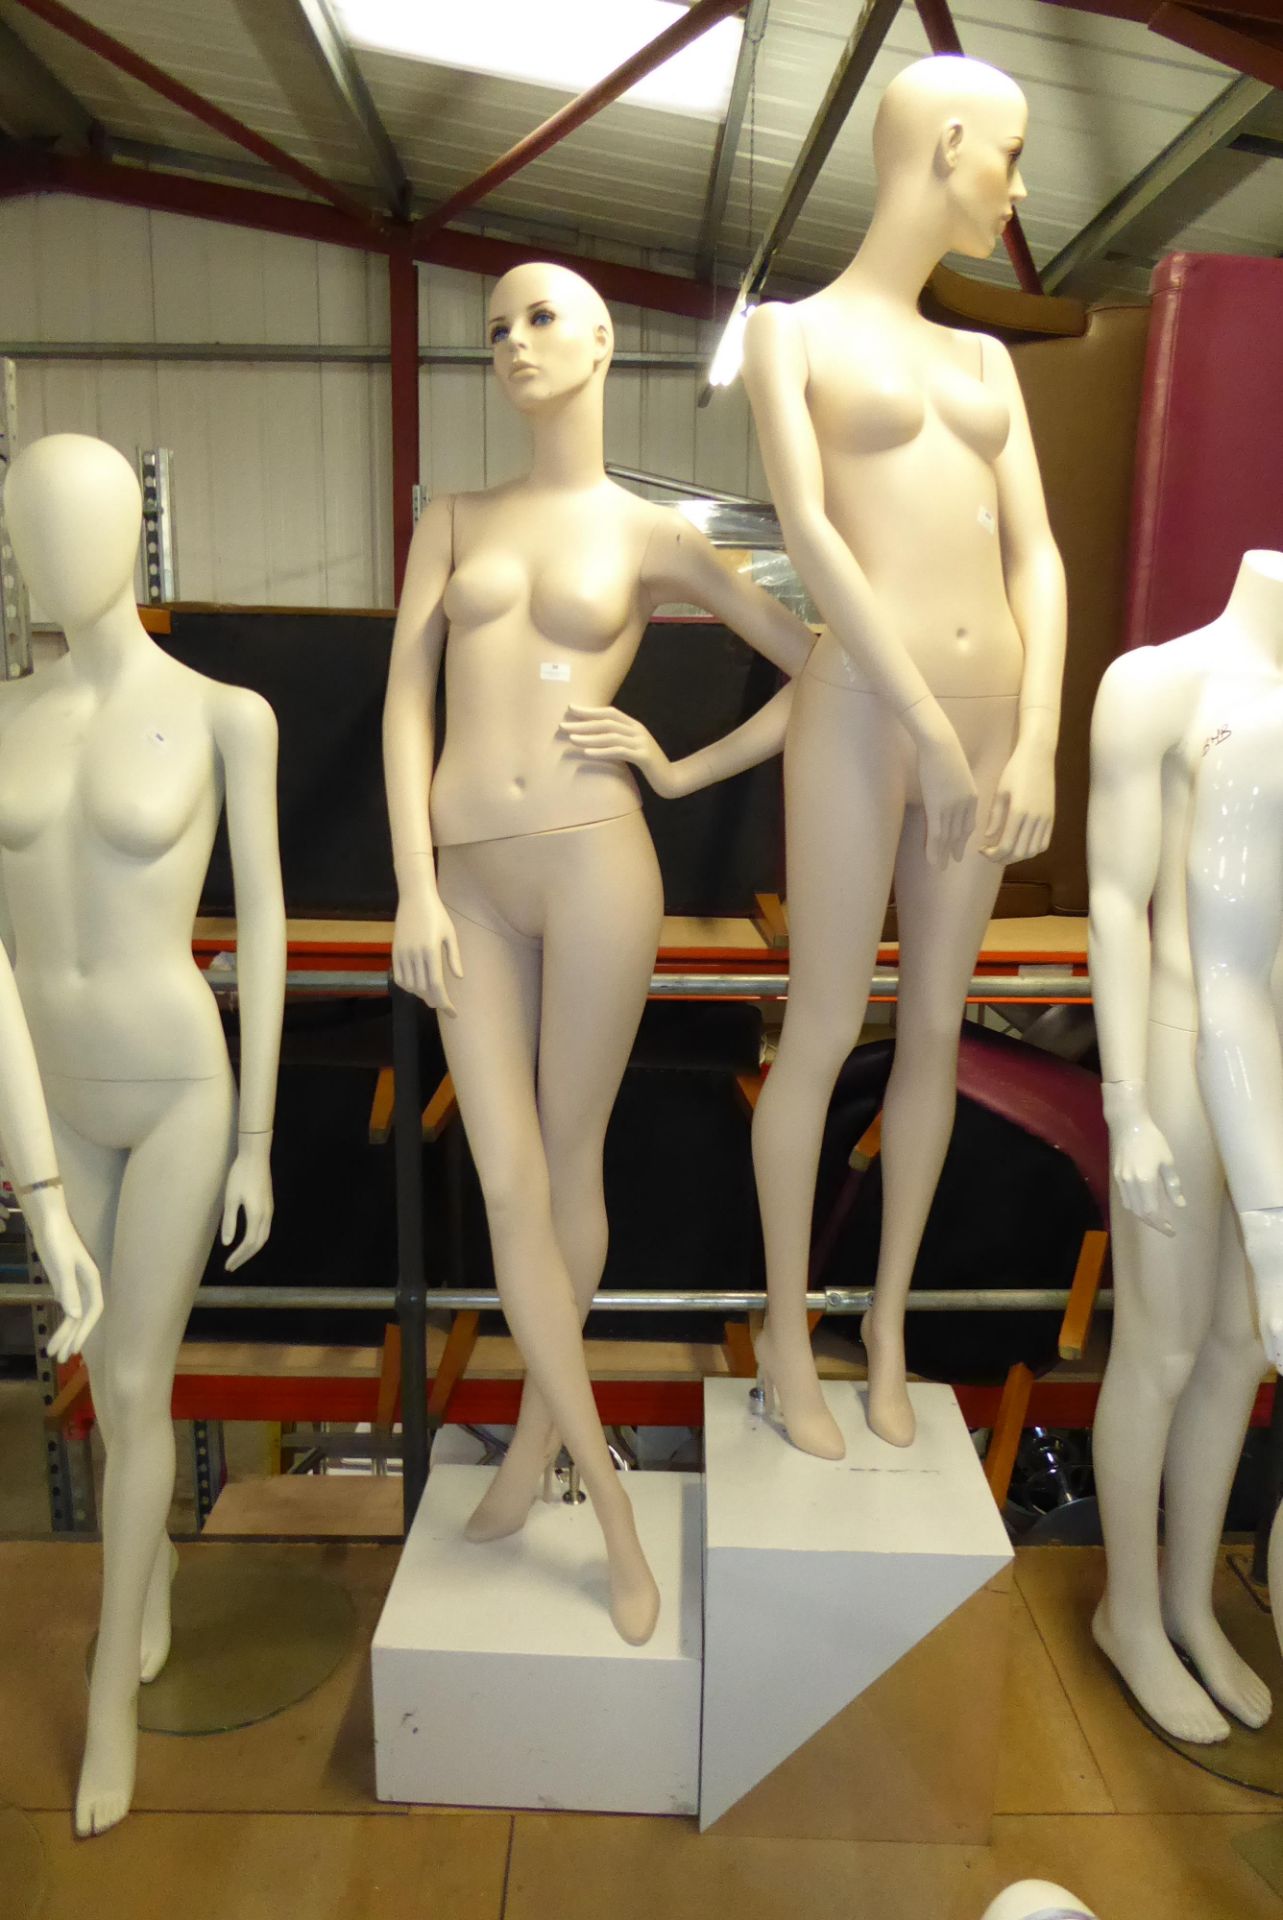 * Two quality female mannequins on plinths